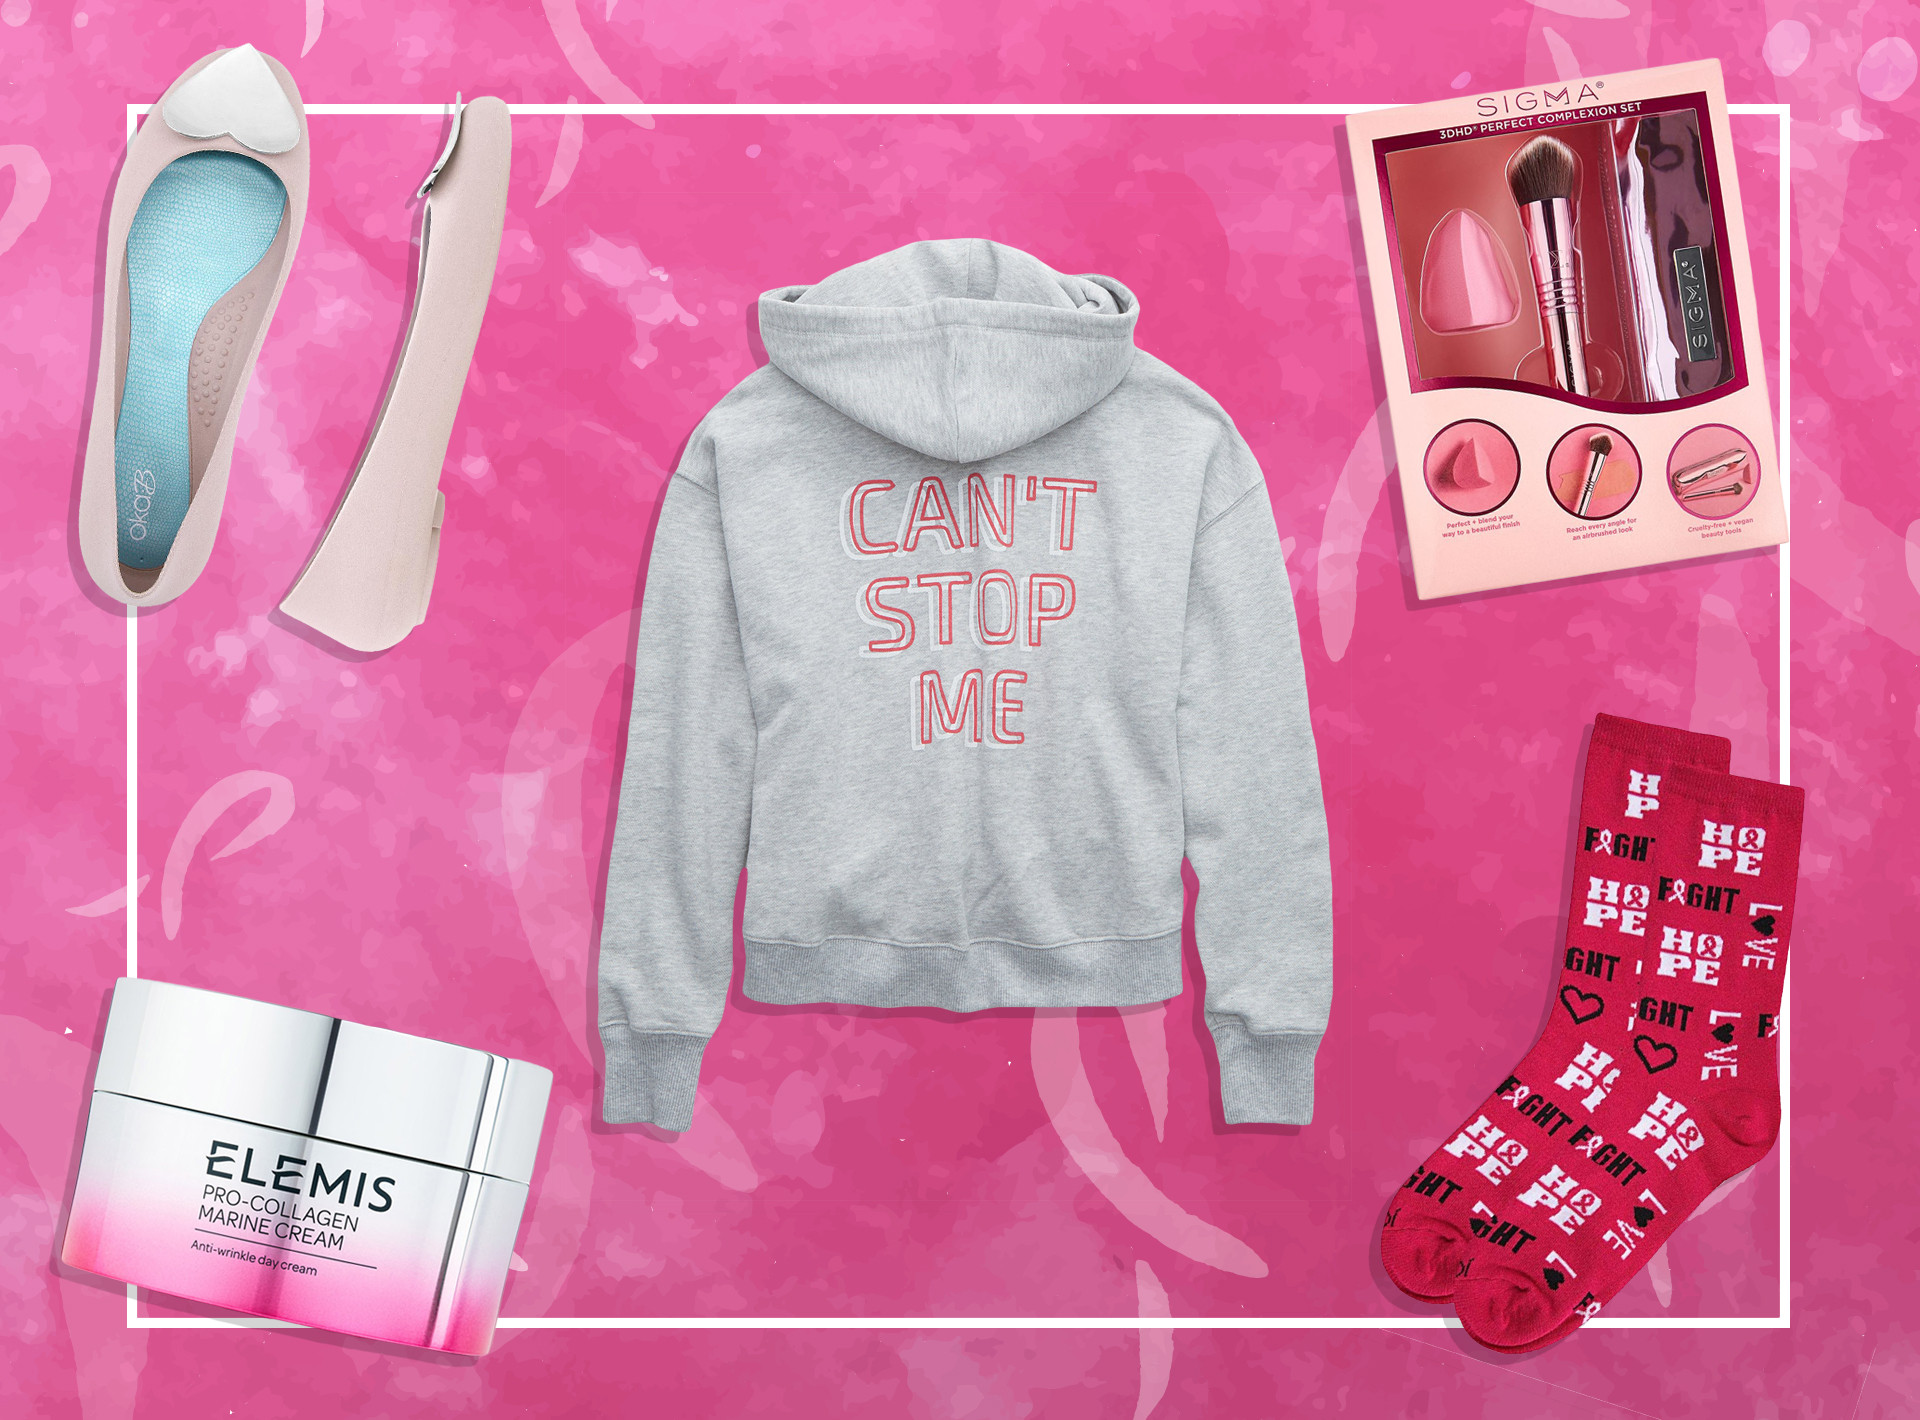 40+ Products That Support Breast Cancer Awareness